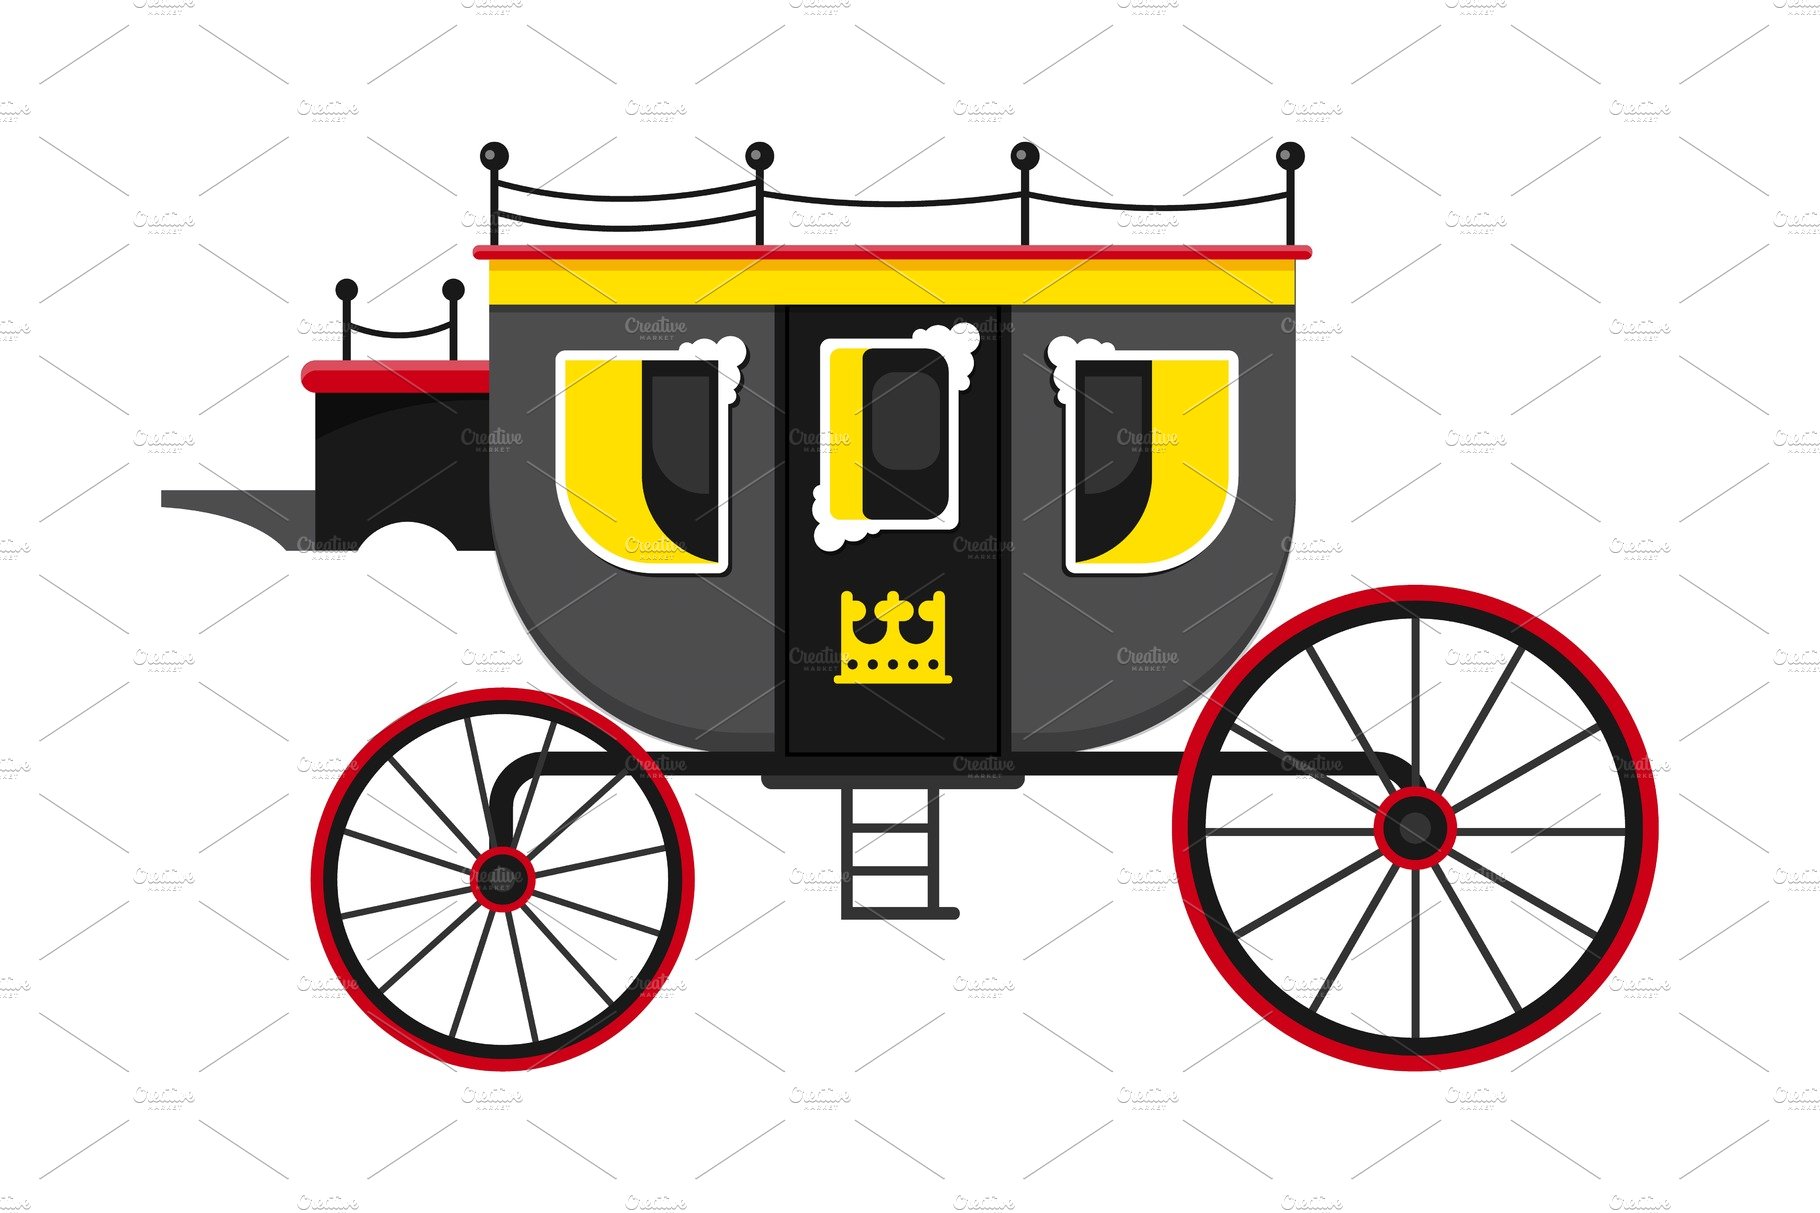 Carriage coach vector vintage cover image.